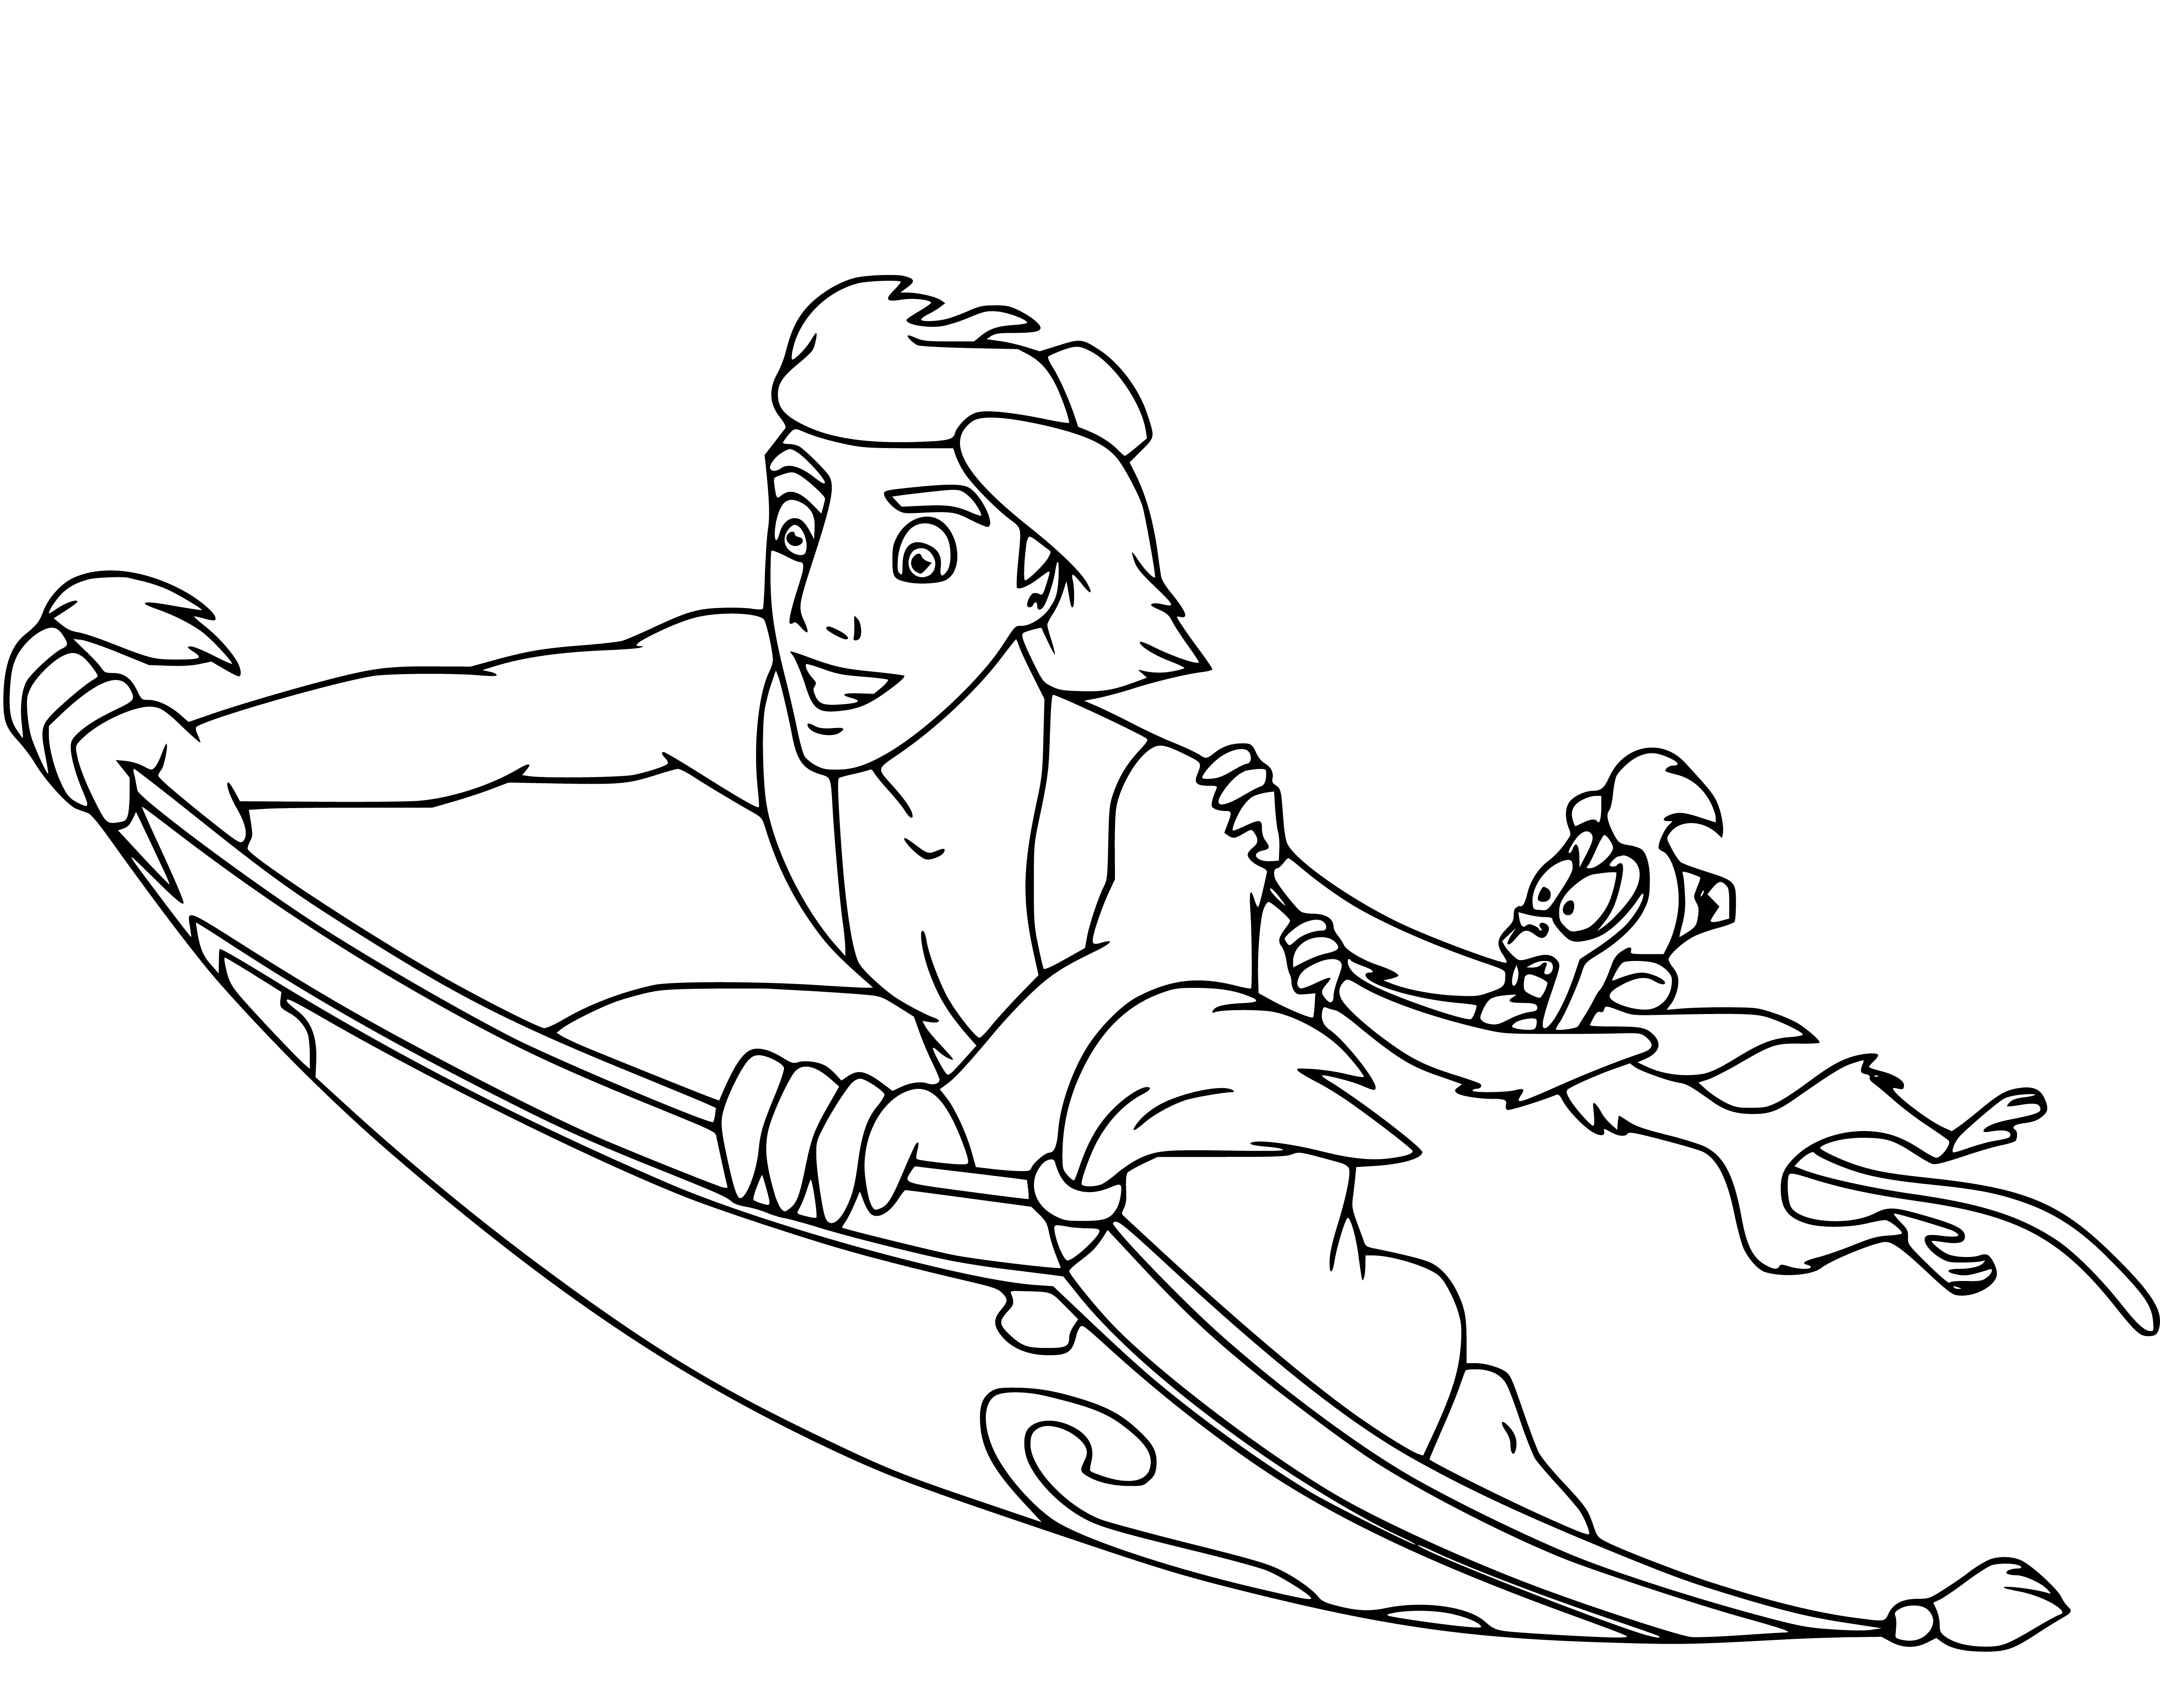 Printable Aladdin on flying carpet Coloring Page for kids.